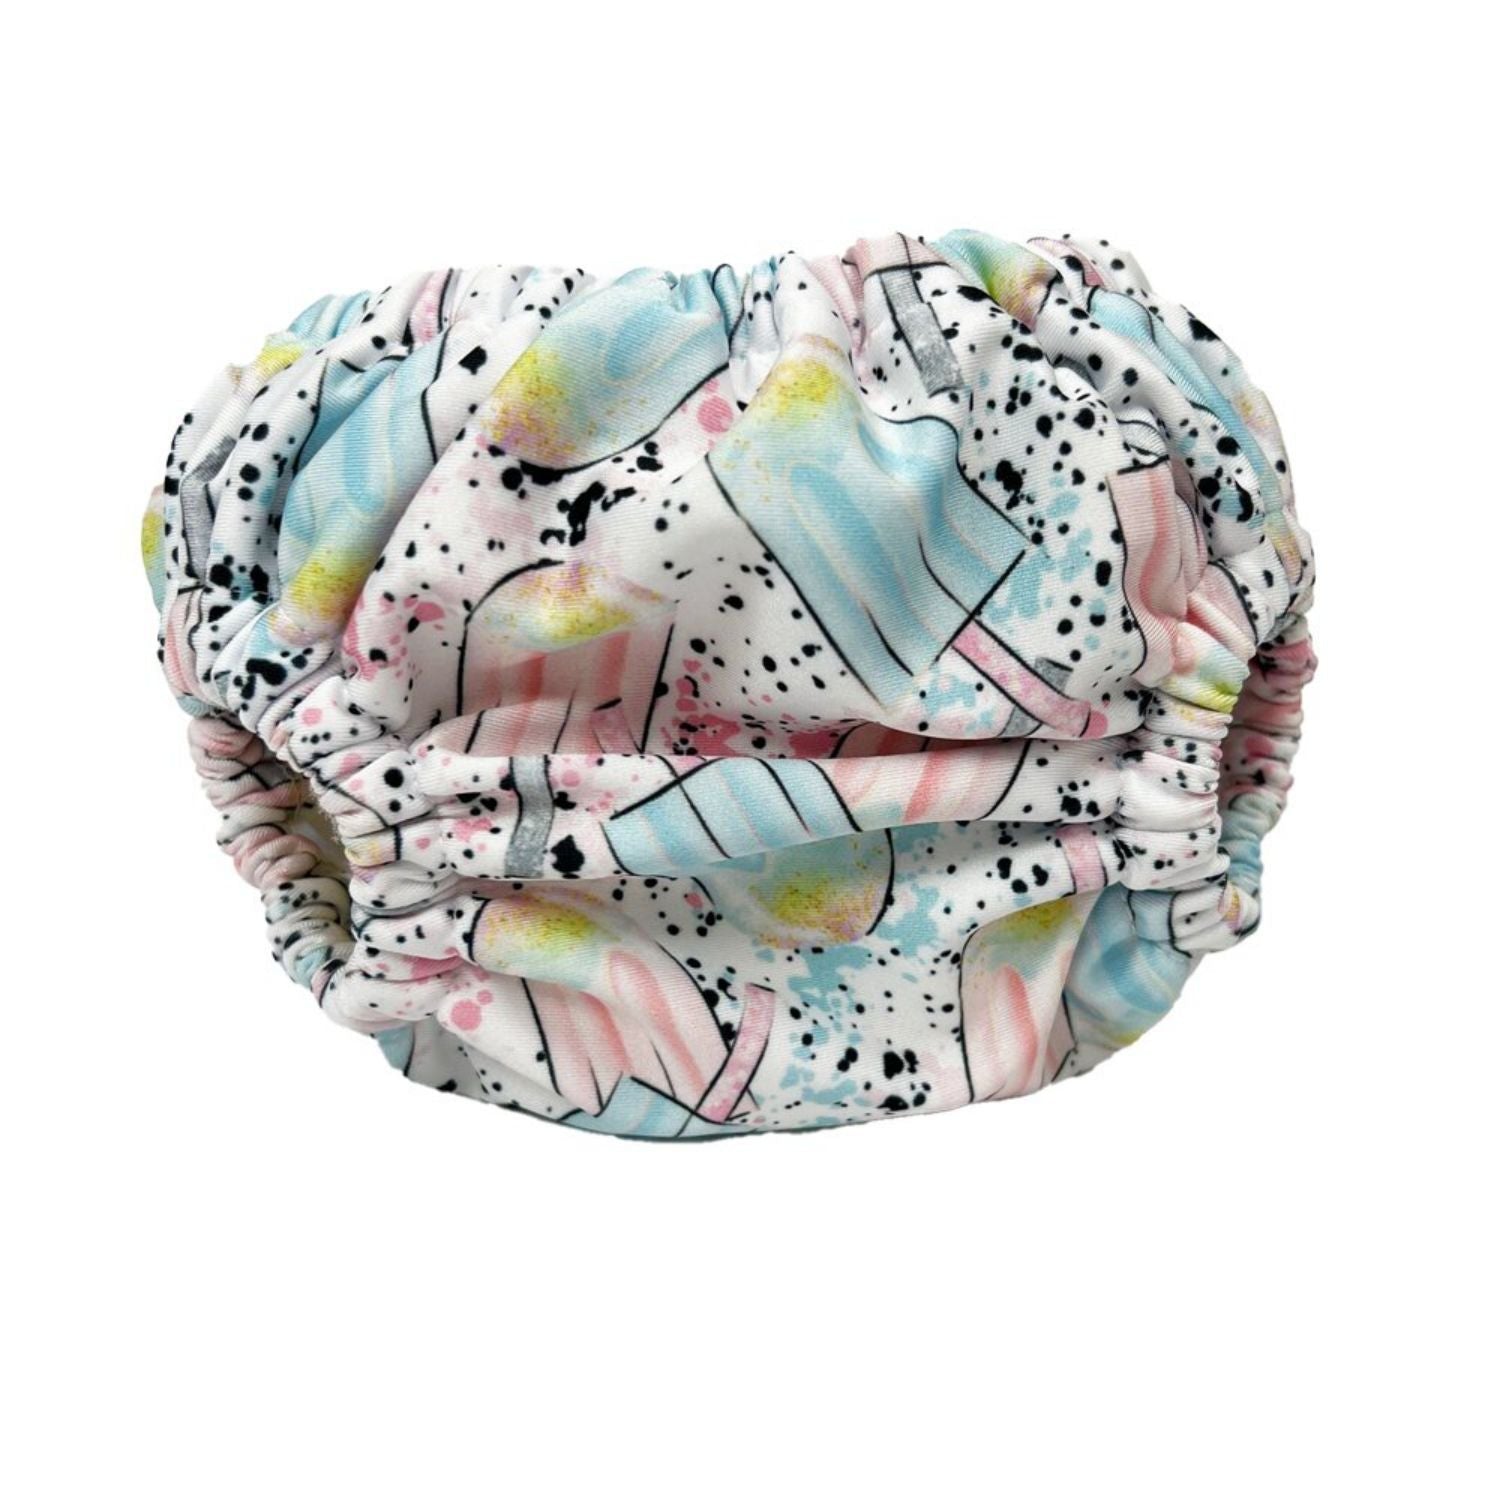 Smart Bottoms Lil Swimmers Swim Nappy - Large 30-50lbs-Swim Nappy-Smart Bottoms-Dinos-The Nappy Market